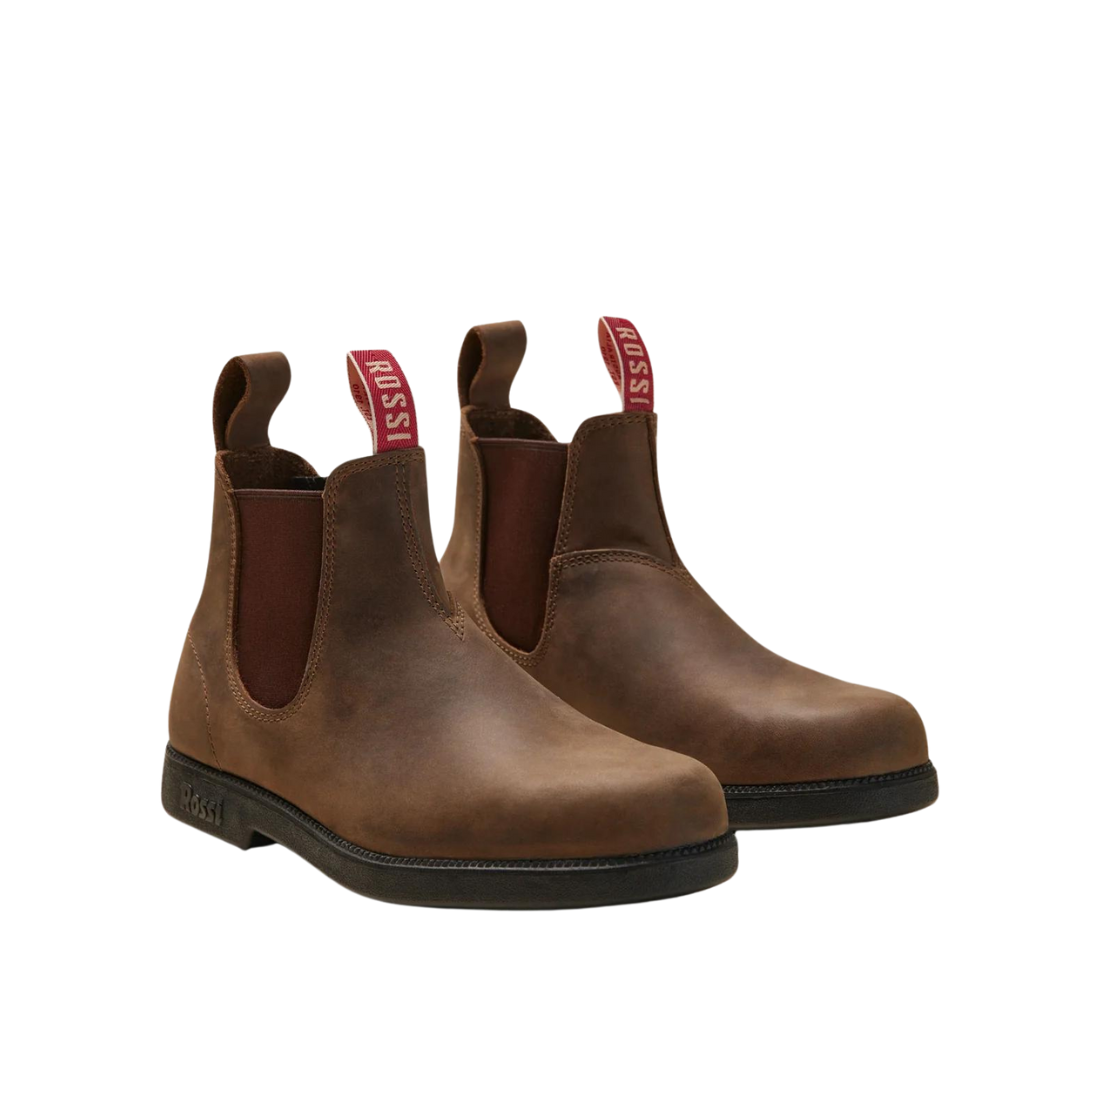 Rossi 607 Booma Pull on Boot Brown Brown Workboots by Rossi | The Bloke Shop